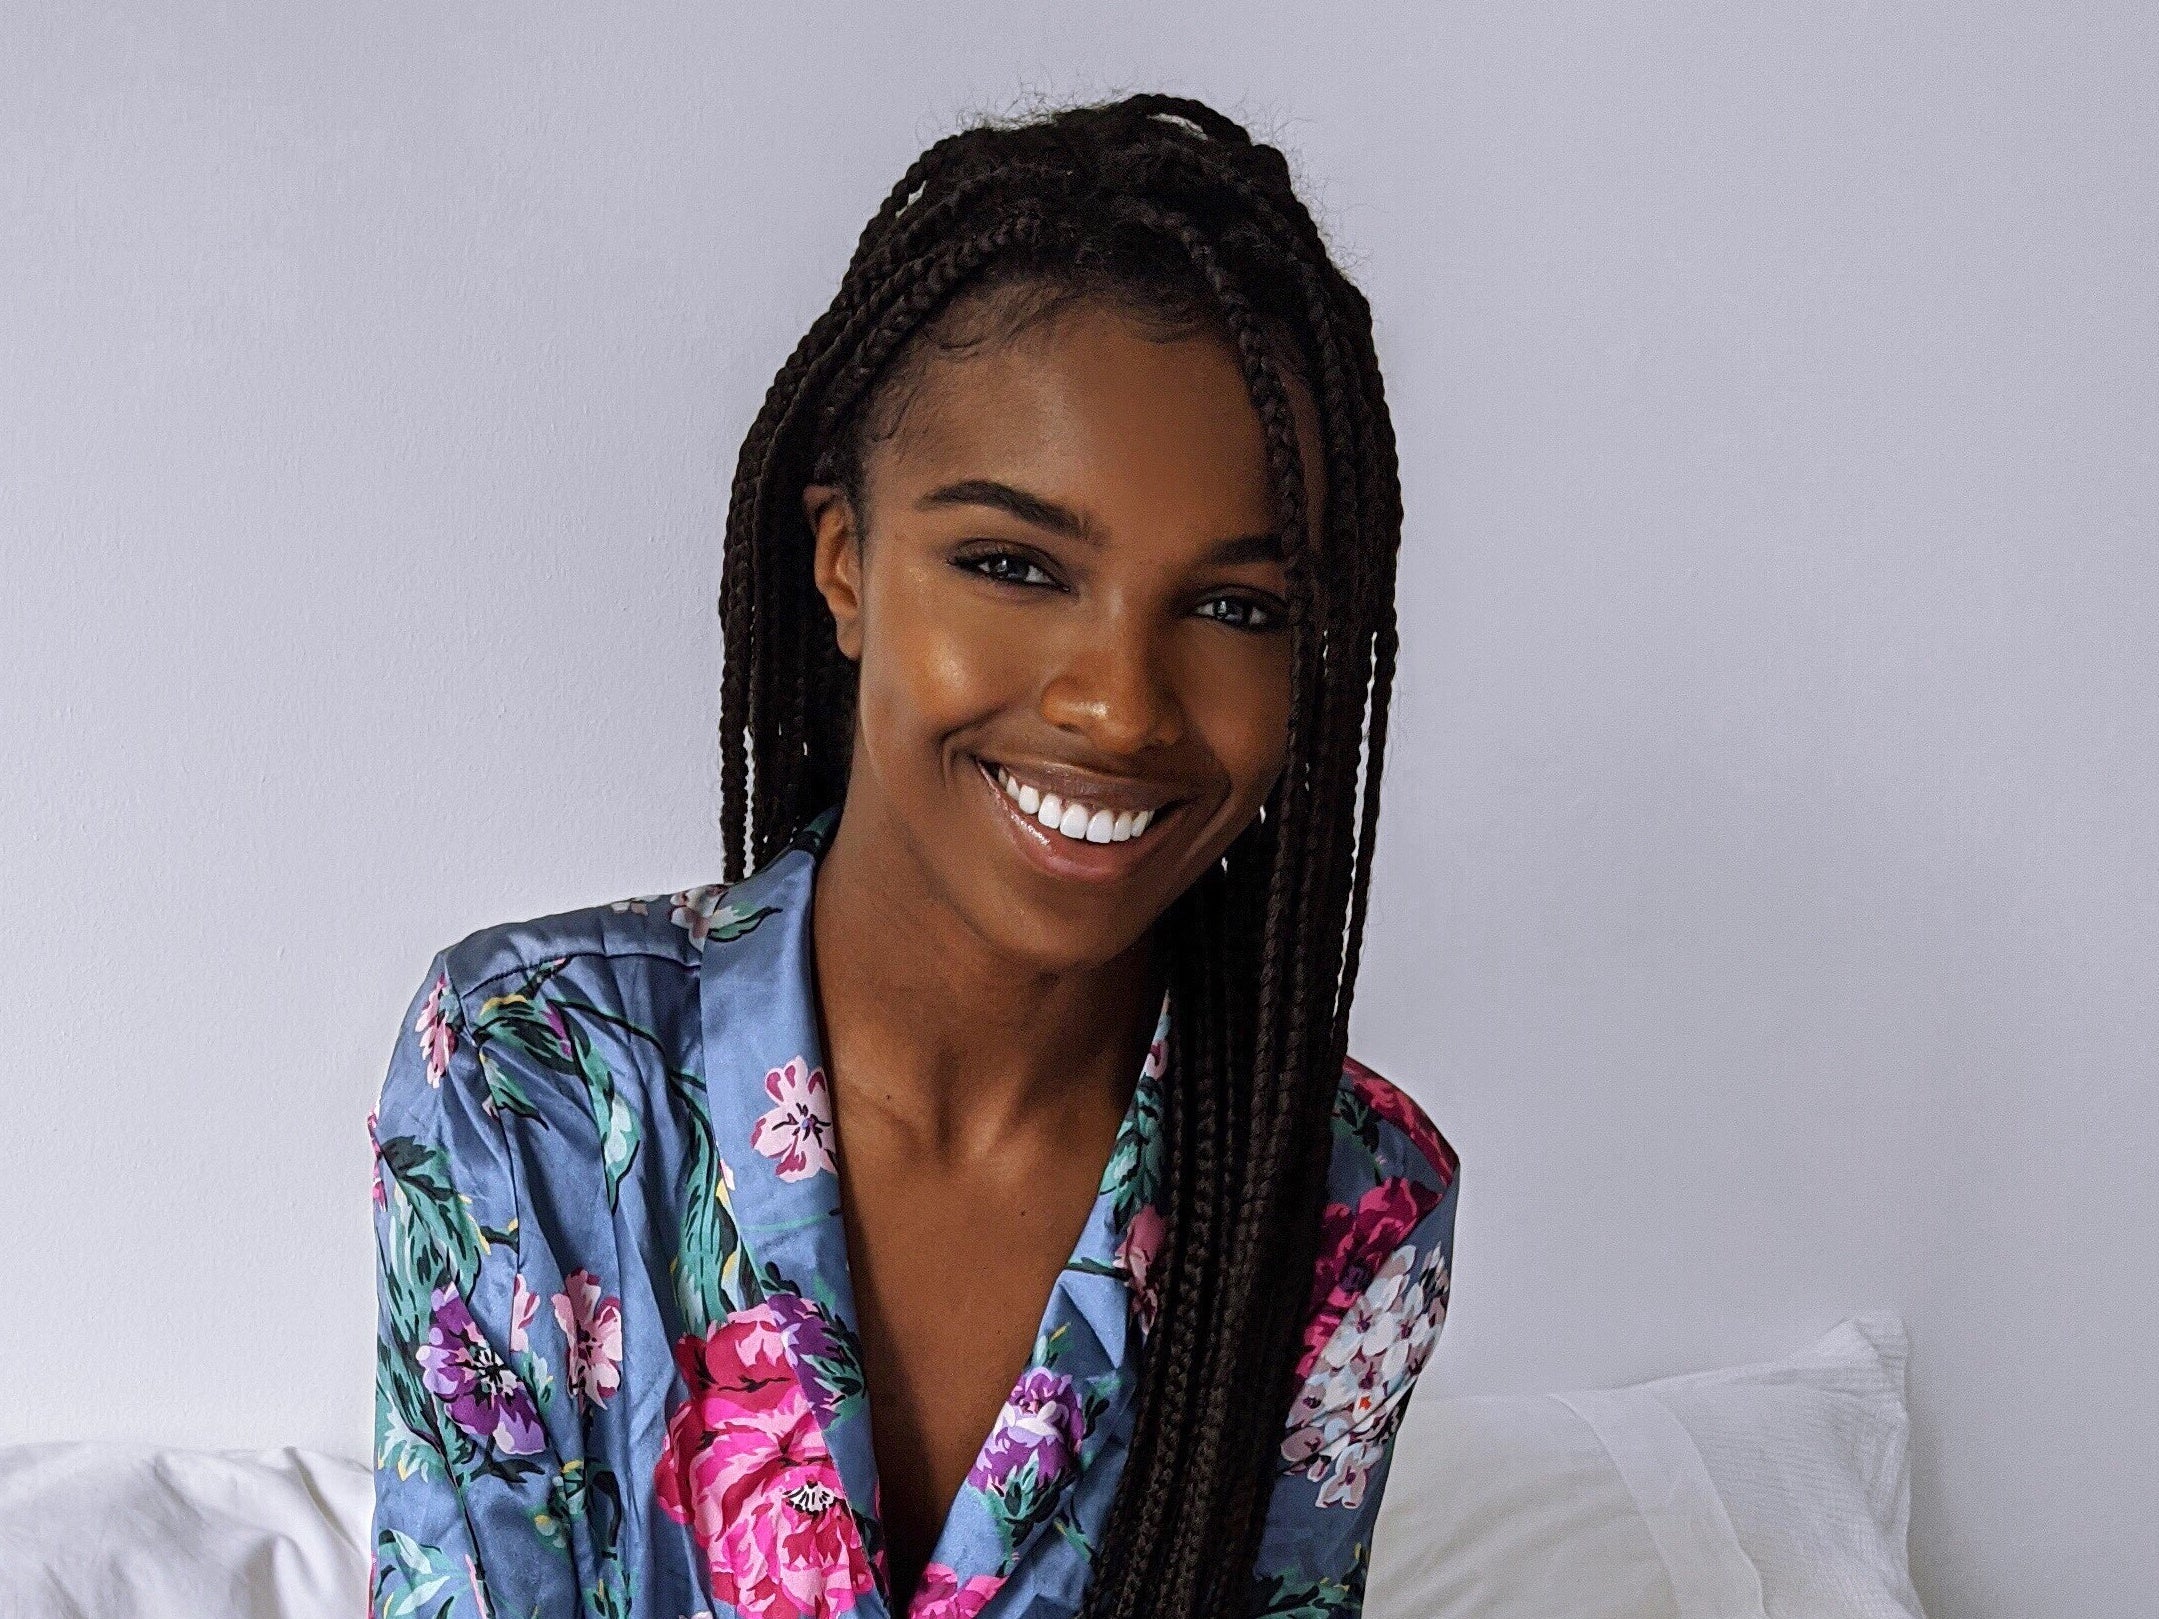 Victoria's Secret Model Leomie Anderson Chats With ESSENCE Girls United On Instagram Live